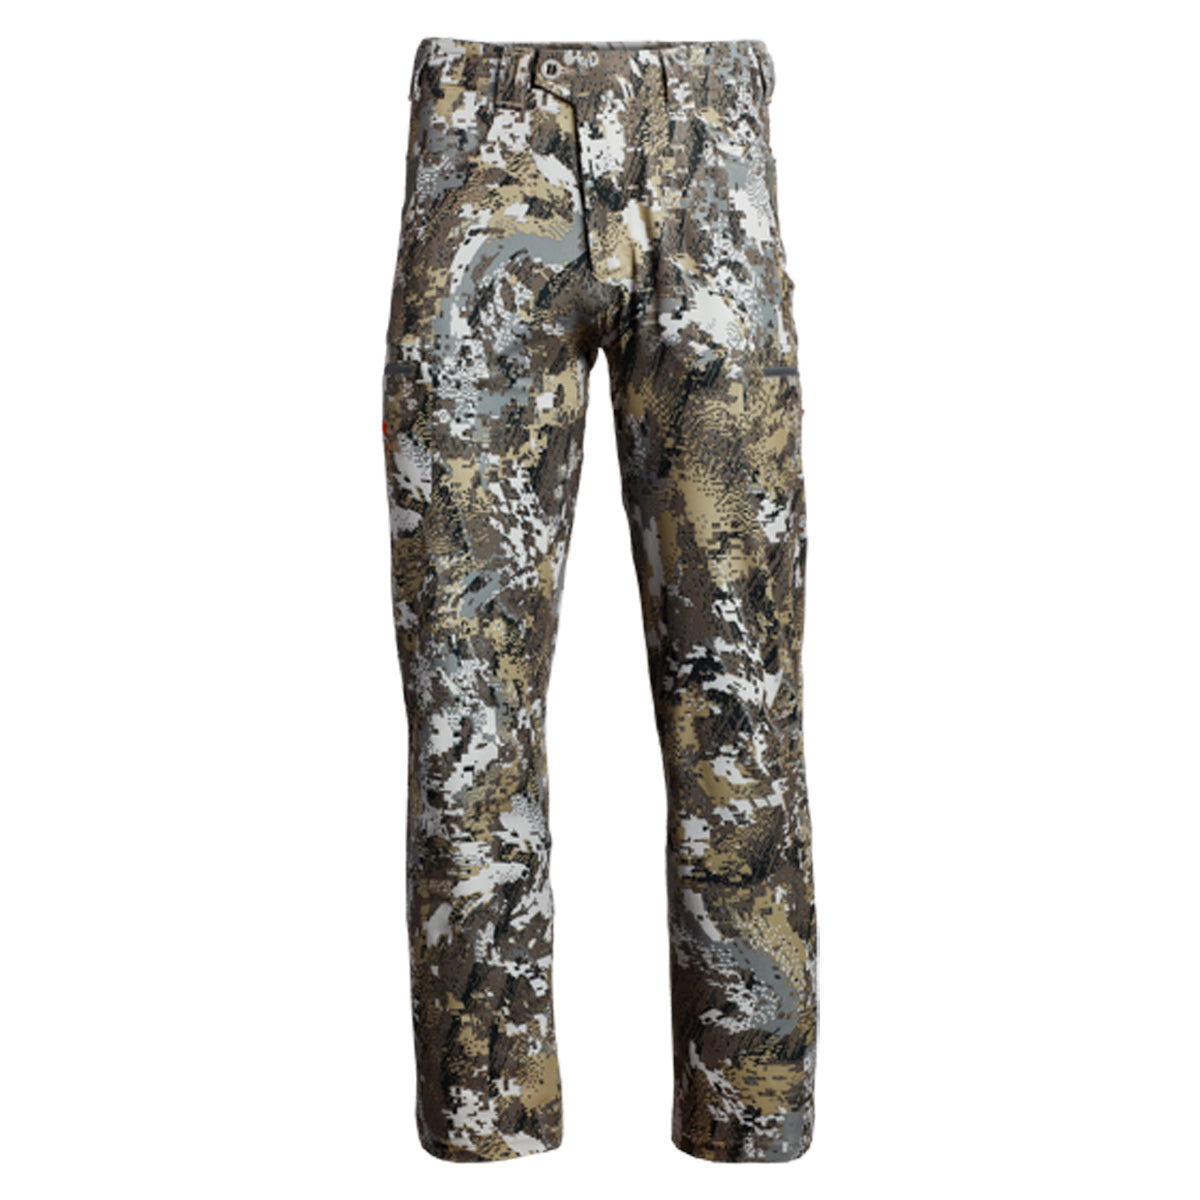 Sitka Traverse Pant in Elevated II by GOHUNT | Sitka - GOHUNT Shop